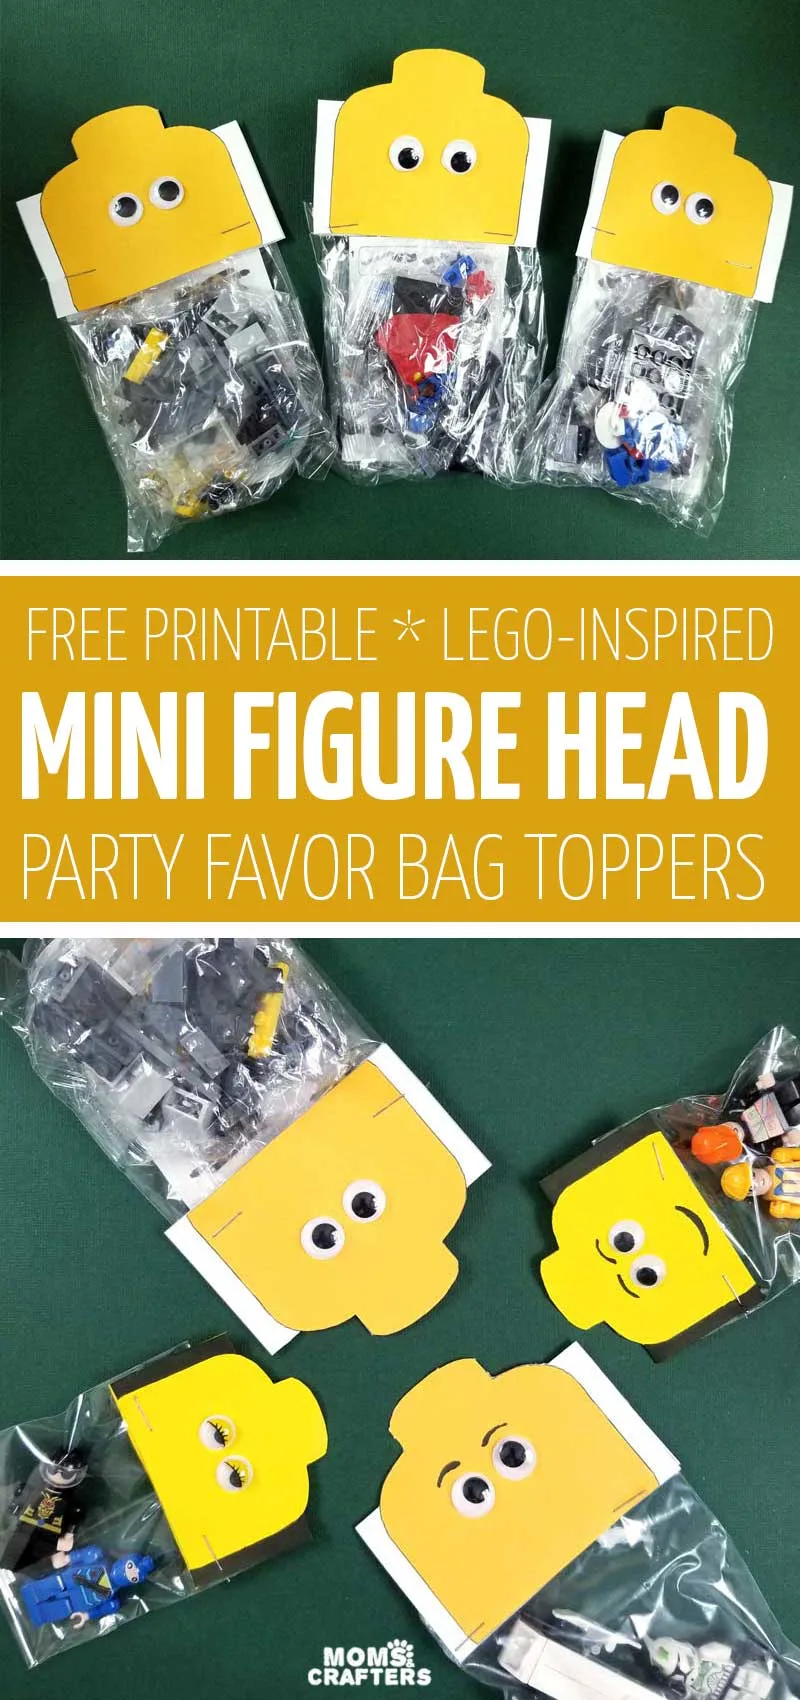 Click for some free printable LEGO inspired favor bags toppers - these cool free printables are in the shape of a minifigure head and are such cool birthday party ideas for a building brick themed party treat bags!